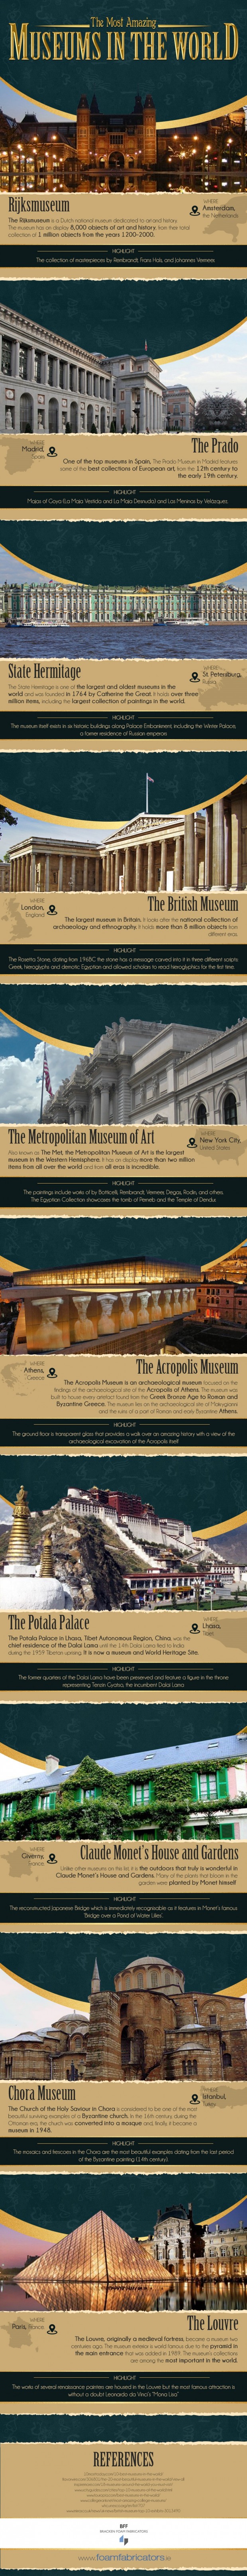 The-Most-Amazing-Museums-in-the-World-Infographic